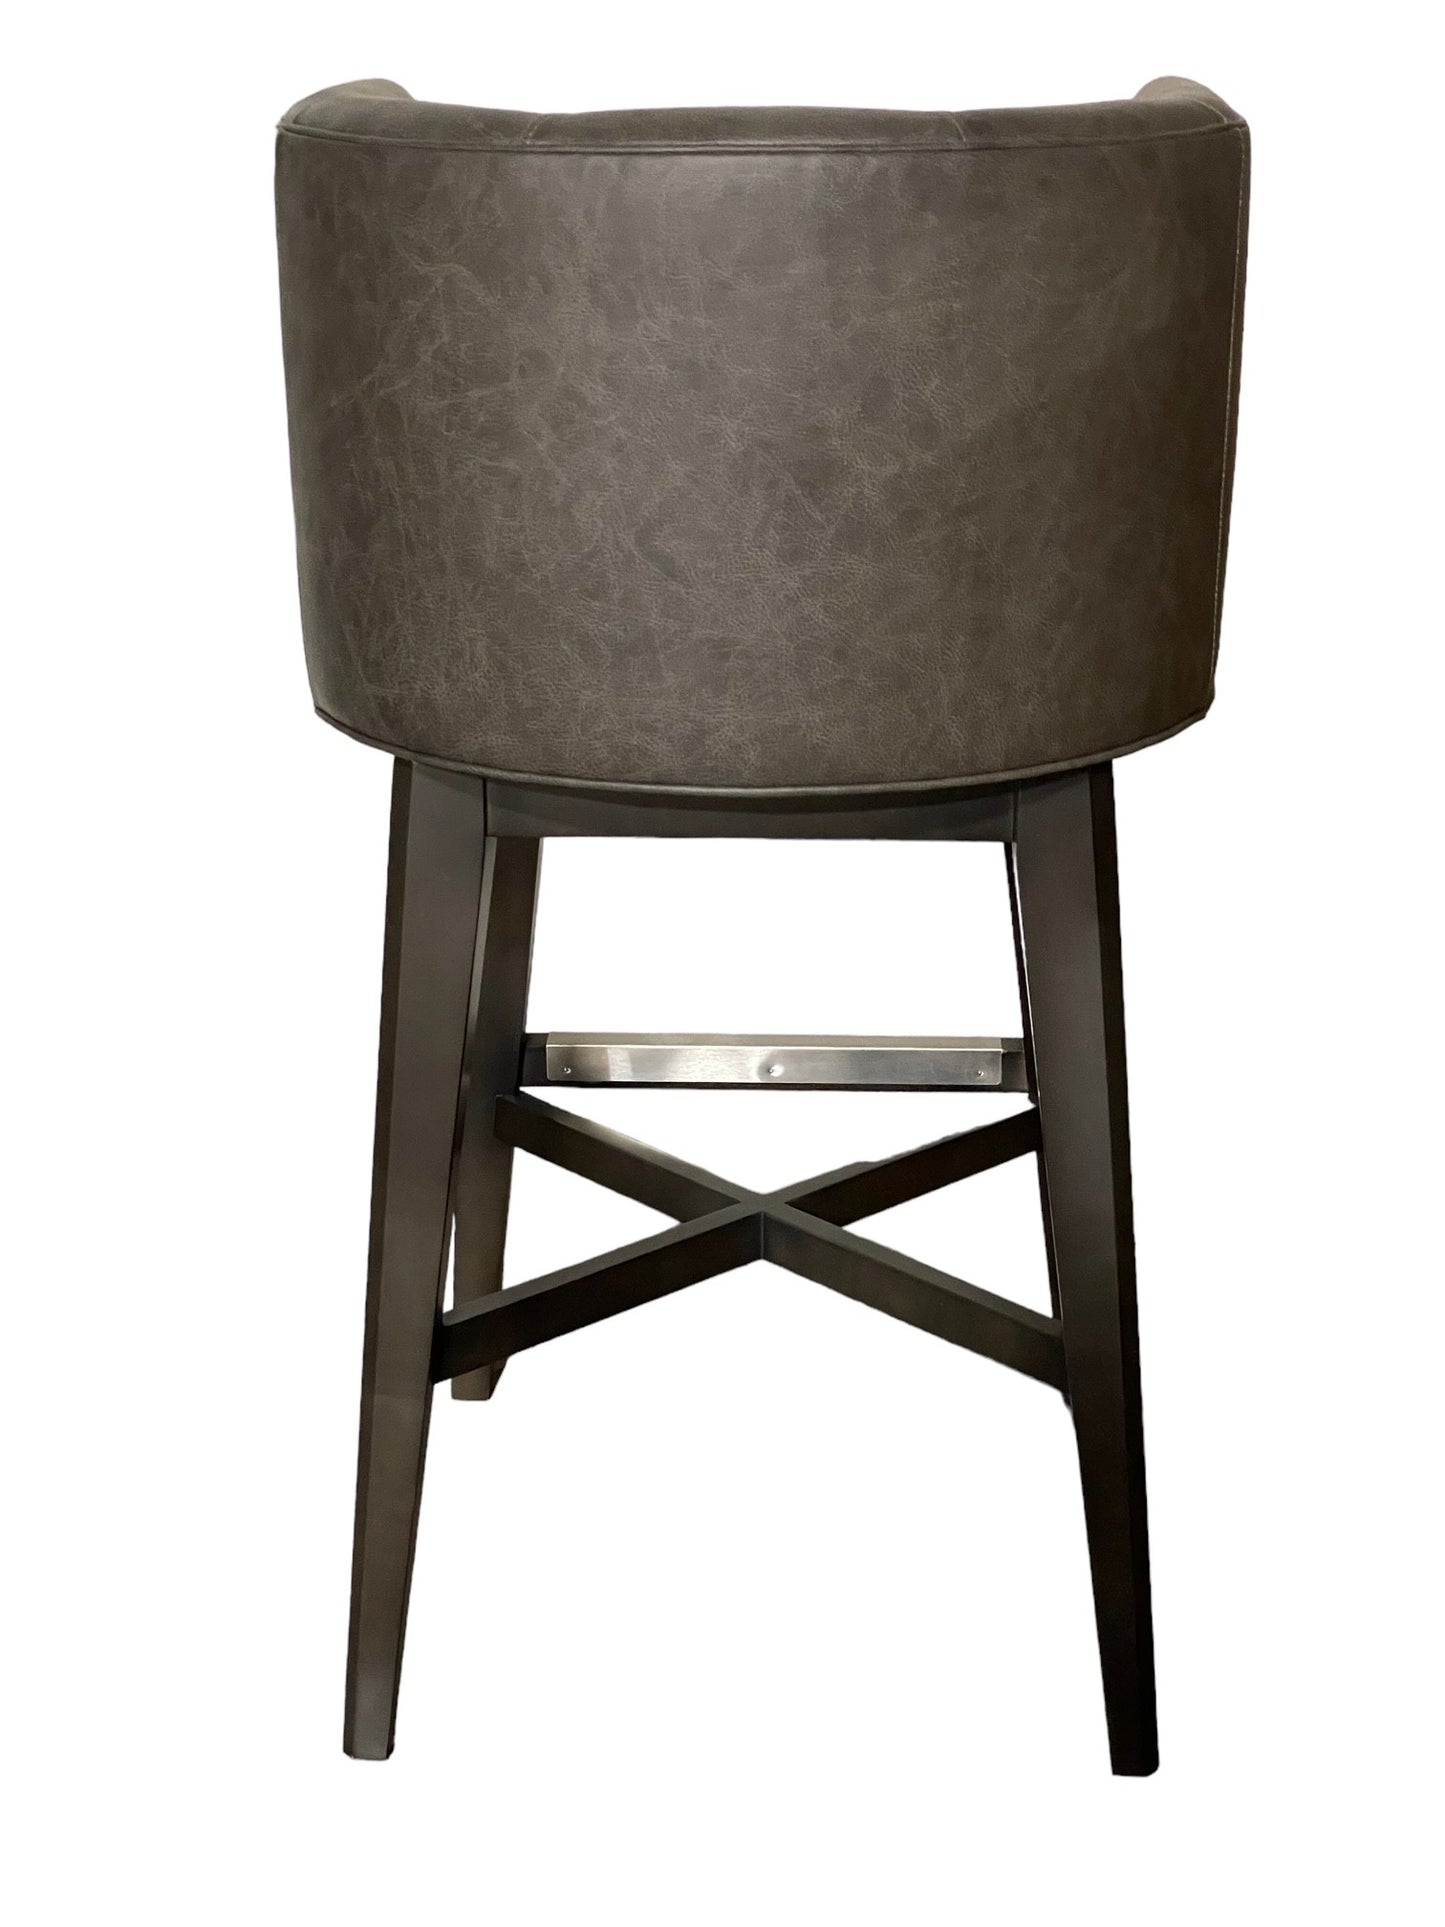 Pair of Leather Barrel Stools HOP104-47